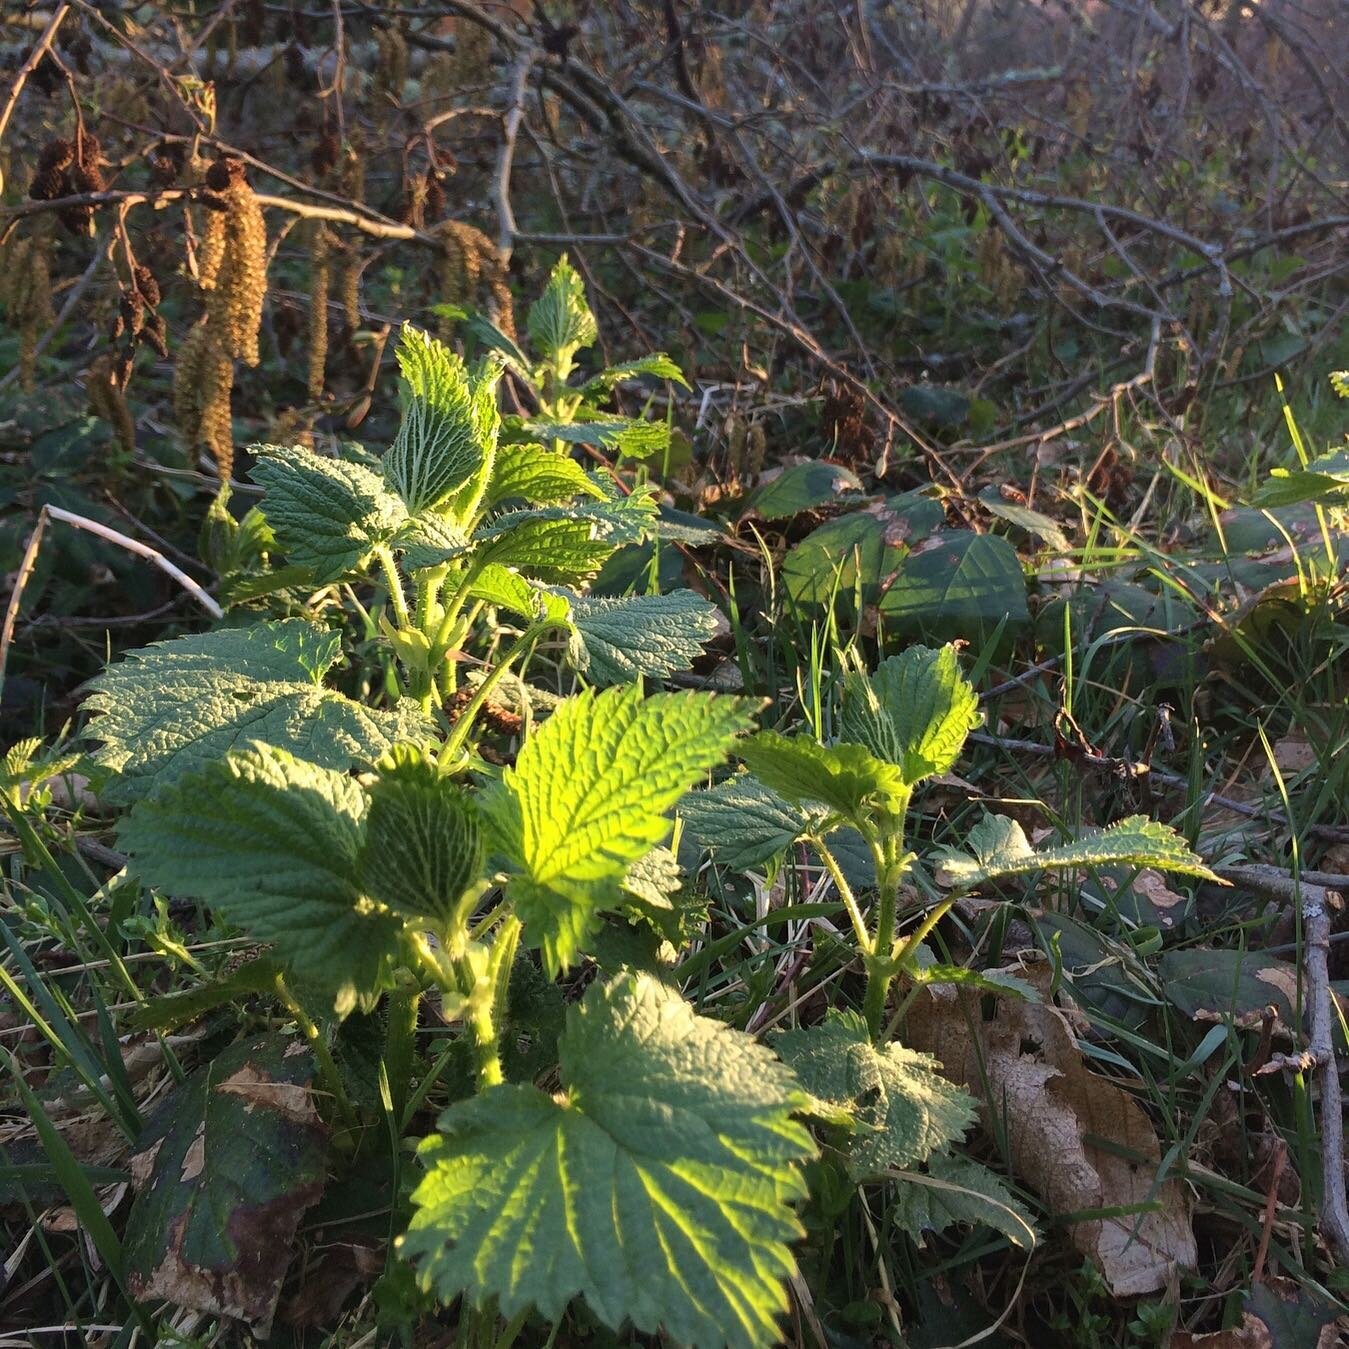 Nettle medicine / nurturance medicine⁠
⁠
Nettle is my friend. I love them, respect them, tend to them, listen to them. Nettle teaches us about boundaries, about springing into action but only after a nice long rest, about life force. ⁠
⁠
Nettle (urti